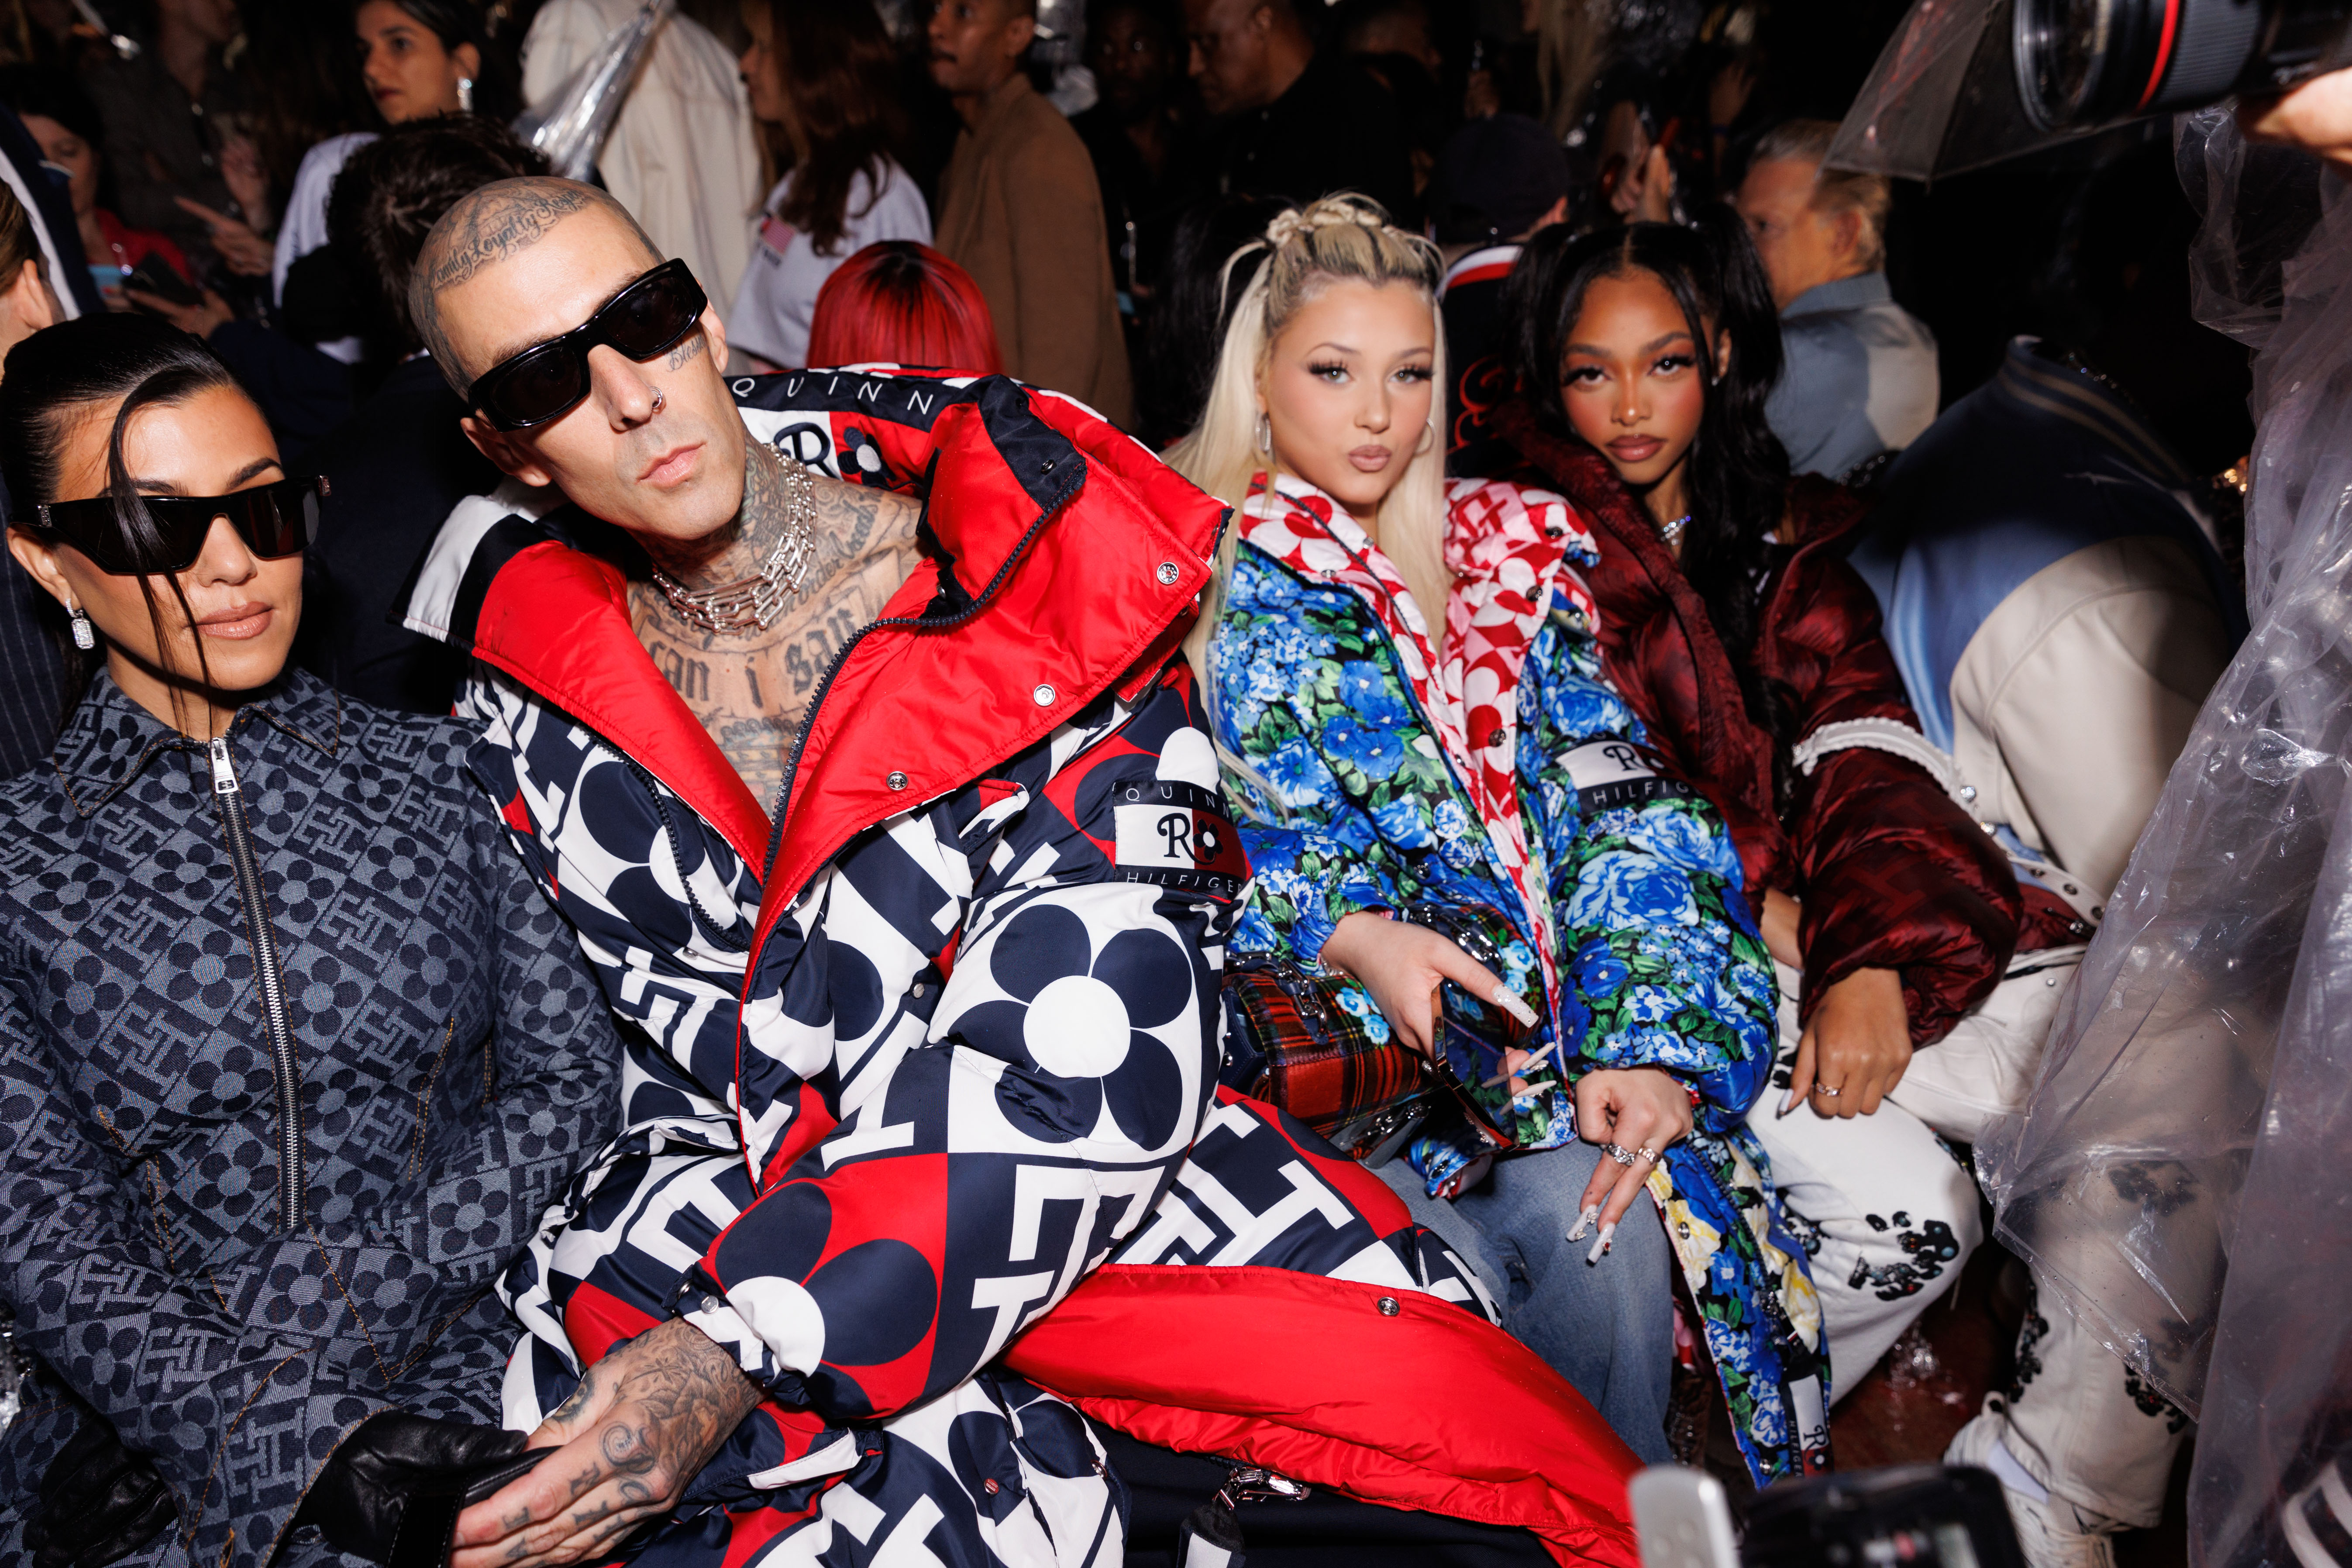 Tommy Hilfiger's Colleagues, Family and Friends Weigh In on HIs Success